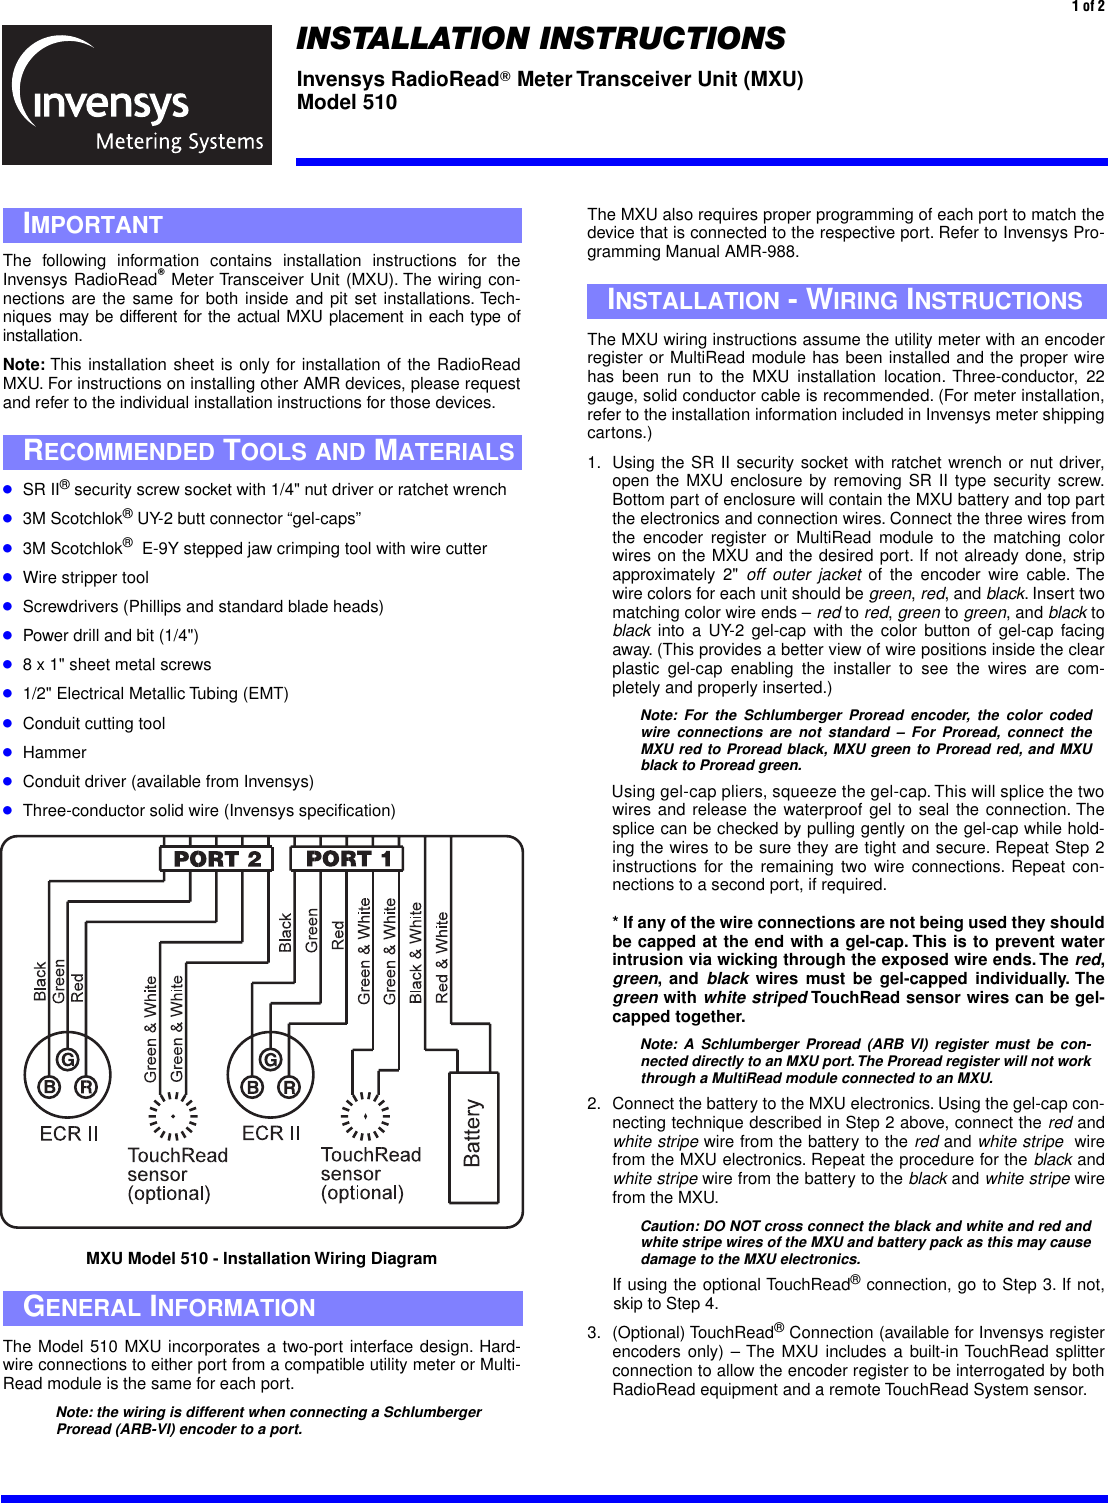  The following information contains installation instructions for theInvensys RadioRead ா  Meter Transceiver Unit (MXU). The wiring con-nections are the same for both inside and pit set installations. Tech-niques may be different for the actual MXU placement in each type ofinstallation. Note:  This installation sheet is only for installation of the RadioReadMXU. For instructions on installing other AMR devices, please requestand refer to the individual installation instructions for those devices. ● SR II ®  security screw socket with 1/4&quot; nut driver or ratchet wrench ● 3M Scotchlok ®  UY-2 butt connector “gel-caps” ● 3M Scotchlok ®   E-9Y stepped jaw crimping tool with wire cutter ● Wire stripper tool ● Screwdrivers (Phillips and standard blade heads) ● Power drill and bit (1/4&quot;) ● 8 x 1&quot; sheet metal screws ● 1/2&quot; Electrical Metallic Tubing (EMT) ● Conduit cutting tool ● Hammer ● Conduit driver (available from Invensys) ● Three-conductor solid wire (Invensys speciﬁcation) I MPORTANT R ECOMMENDED  T OOLS   AND  M ATERIALS  1 of 2 MXU Model 510 - Installation Wiring Diagram The MXU also requires proper programming of each port to match thedevice that is connected to the respective port. Refer to Invensys Pro-gramming Manual AMR-988.The MXU wiring instructions assume the utility meter with an encoderregister or MultiRead module has been installed and the proper wirehas been run to the MXU installation location. Three-conductor, 22gauge, solid conductor cable is recommended. (For meter installation,refer to the installation information included in Invensys meter shippingcartons.)1. Using the SR II security socket with ratchet wrench or nut driver,open the MXU enclosure by removing SR II type security screw.Bottom part of enclosure will contain the MXU battery and top partthe electronics and connection wires. Connect the three wires fromthe encoder register or MultiRead module to the matching colorwires on the MXU and the desired port. If not already done, stripapproximately 2&quot;  off outer jacket  of the encoder wire cable. Thewire colors for each unit should be  green ,  red , and  black . Insert twomatching color wire ends –  red  to  red ,  green  to  green , and  black  to black  into a UY-2 gel-cap with the color button of gel-cap facingaway. (This provides a better view of wire positions inside the clearplastic gel-cap enabling the installer to see the wires are com-pletely and properly inserted.) Note: For the Schlumberger Proread encoder, the color codedwire connections are not standard – For Proread, connect theMXU red to Proread black, MXU green to Proread red, and MXUblack to Proread green.  Using gel-cap pliers, squeeze the gel-cap. This will splice the twowires and release the waterproof gel to seal the connection. Thesplice can be checked by pulling gently on the gel-cap while hold-ing the wires to be sure they are tight and secure. Repeat Step 2instructions for the remaining two wire connections. Repeat con-nections to a second port, if required. * If any of the wire connections are not being used they shouldbe capped at the end with a gel-cap. This is to prevent waterintrusion via wicking through the exposed wire ends. The  red , green , and  black  wires must be gel-capped individually. The green  with  white striped  TouchRead sensor wires can be gel-capped together. Note: A Schlumberger Proread (ARB VI) register must be con-nected directly to an MXU port. The Proread register will not workthrough a MultiRead module connected to an MXU. 2. Connect the battery to the MXU electronics. Using the gel-cap con-necting technique described in Step 2 above, connect the  red  and white stripe  wire from the battery to the  red  and  white stripe   wirefrom the MXU electronics. Repeat the procedure for the  black  and white stripe  wire from the battery to the  black  and  white stripe  wirefrom the MXU.  Caution: DO NOT cross connect the black and white and red andwhite stripe wires of the MXU and battery pack as this may causedamage to the MXU electronics. If using the optional TouchRead ®  connection, go to Step 3. If not,skip to Step 4. 3. (Optional) TouchRead ®  Connection (available for Invensys registerencoders only) – The MXU includes a built-in TouchRead splitterconnection to allow the encoder register to be interrogated by bothRadioRead equipment and a remote TouchRead System sensor. I NSTALLATION  - W IRING  I NSTRUCTIONS The Model 510 MXU incorporates a two-port interface design. Hard-wire connections to either port from a compatible utility meter or Multi-Read module is the same for each port. Note: the wiring is different when connecting a Schlumberger Proread (ARB-VI) encoder to a port. G ENERAL  I NFORMATION INSTALLATION INSTRUCTIONS Invensys RadioRead ா  Meter Transceiver Unit (MXU)Model 510